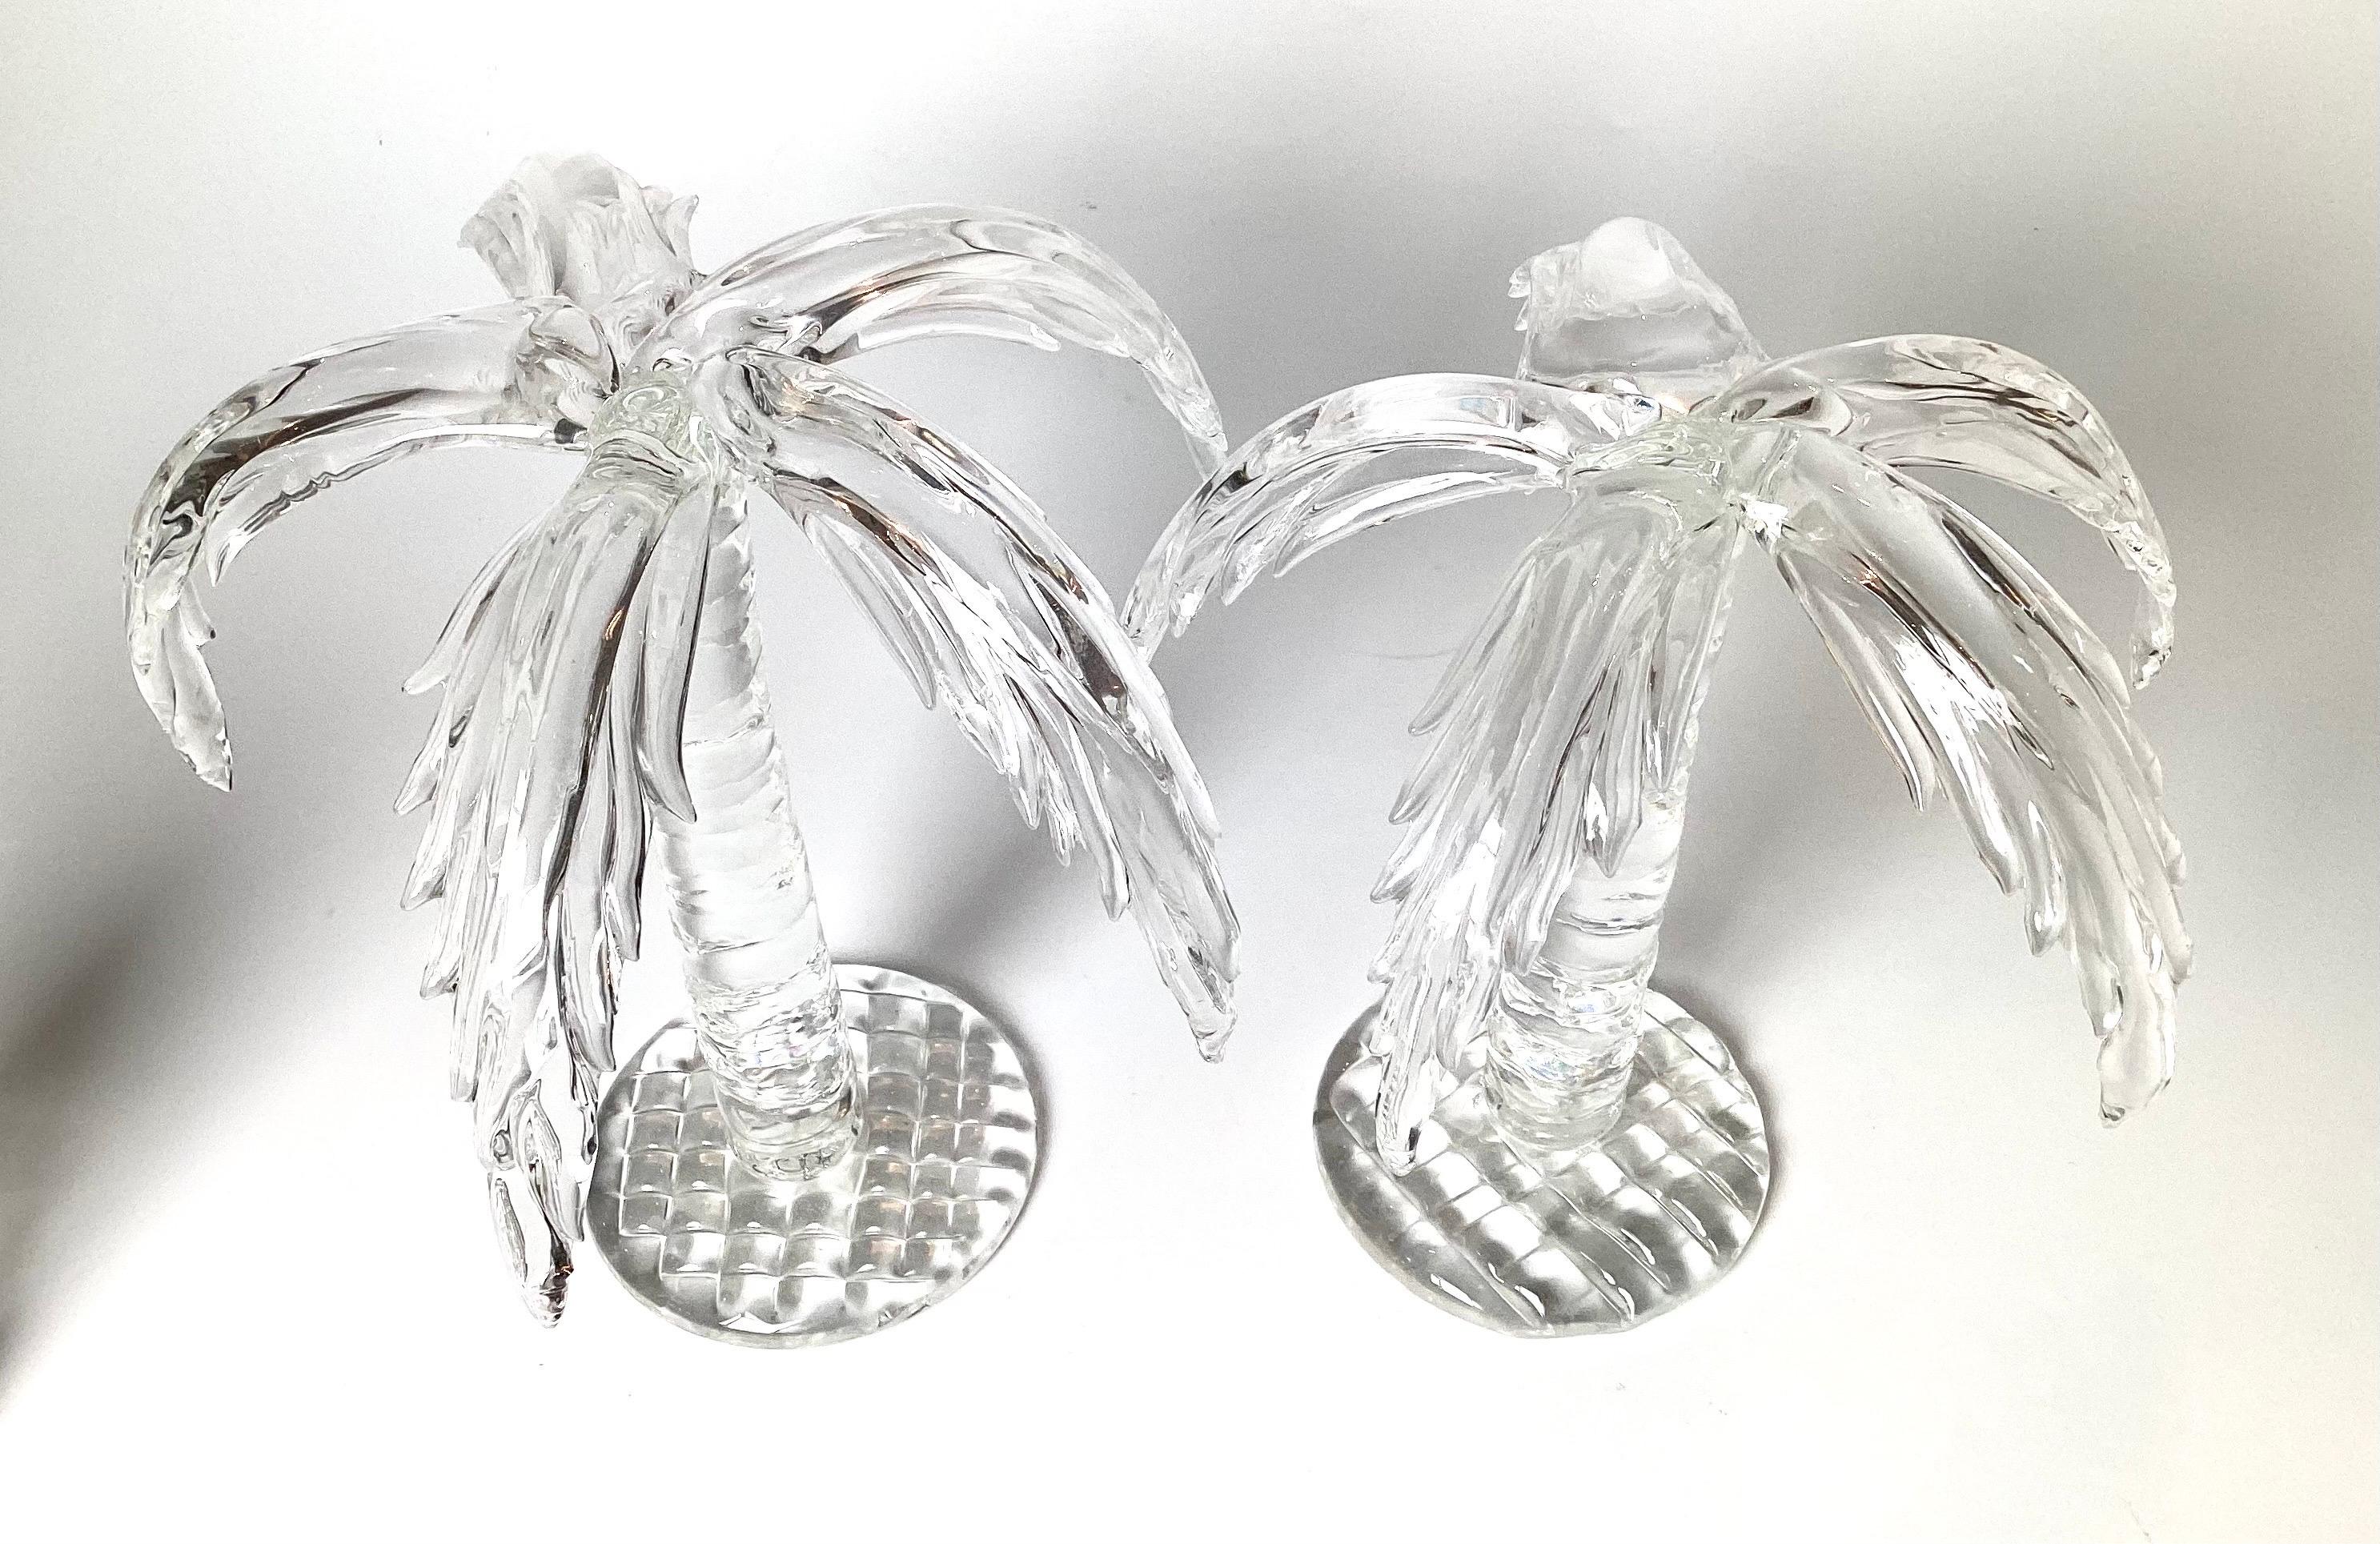 An elegant pair of crystal palm trees attributed to Icet Arte Murano, Christaleria Artistica, hand made in Italy, 1970, the pair at 10 inches tall, one slightly taller than the other, using the hand made artist liberty.